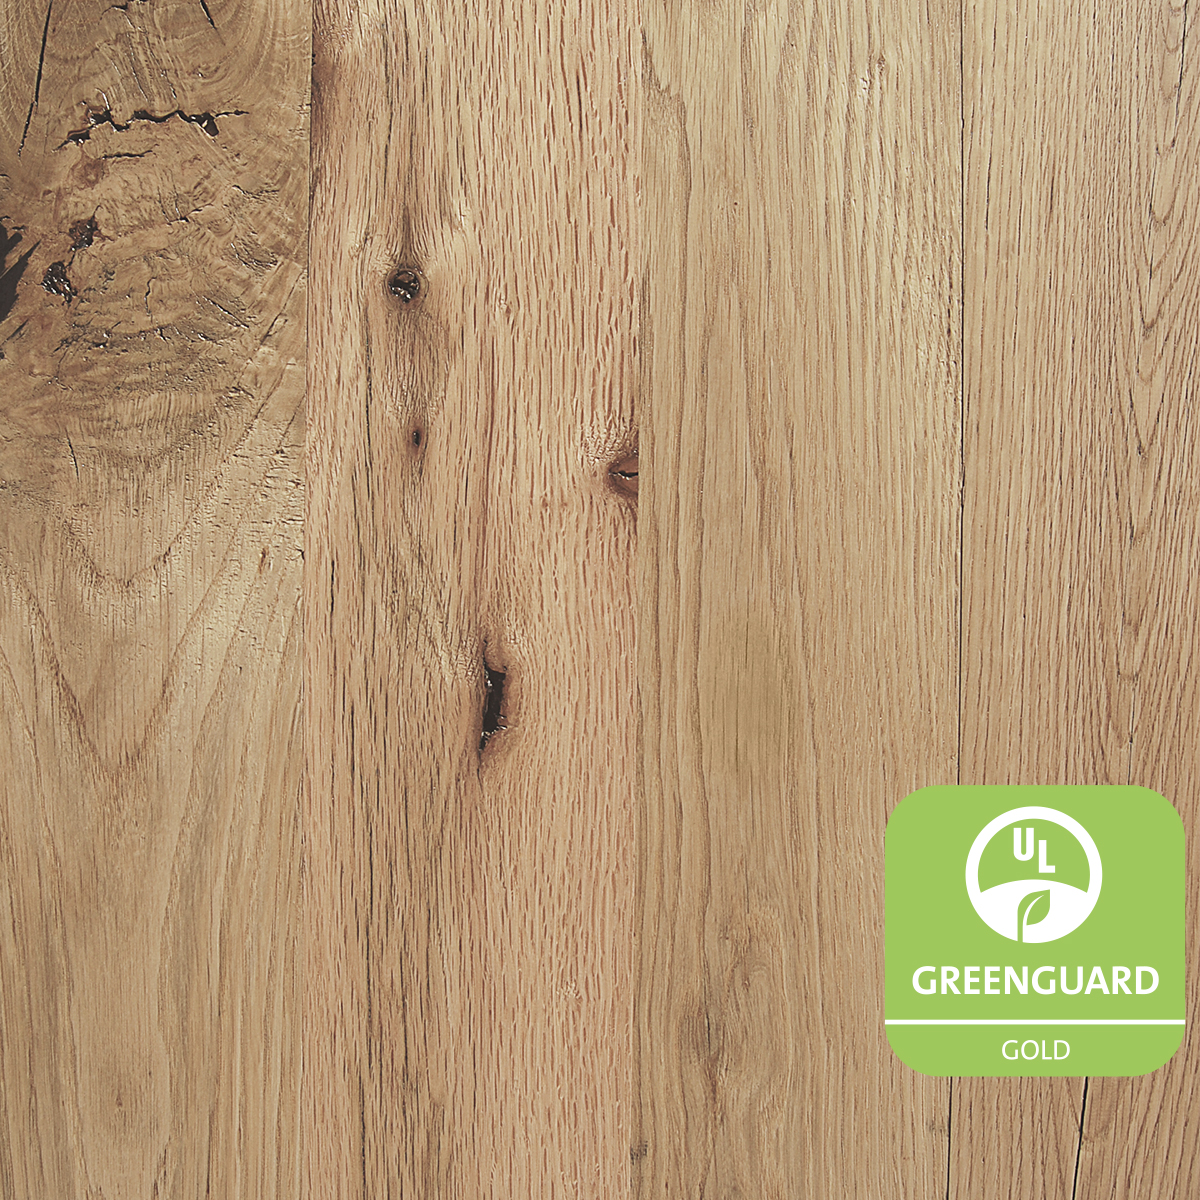 Pioneer Millworks Reclaimed Mixed Oak flooring and paneling product, Black & Tan—Tan, is now UL GREENGUARD Gold Certified. It is one of 22 of the company's UL GREENGUARD Gold certified wood products.